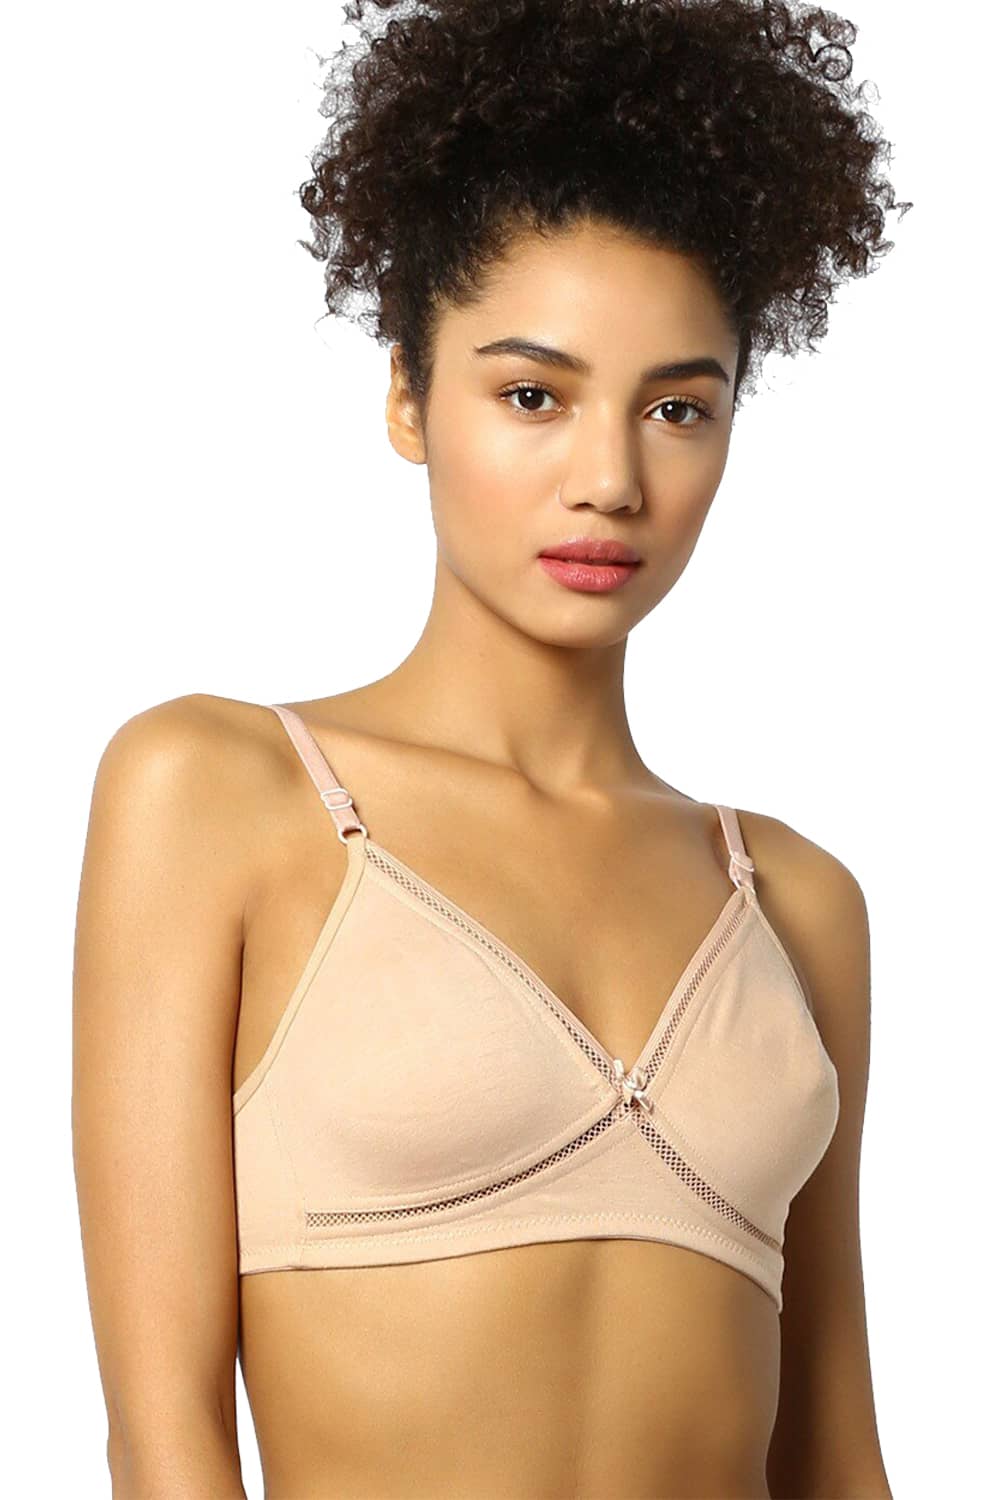 Cotton On cross over padded cotton bralet